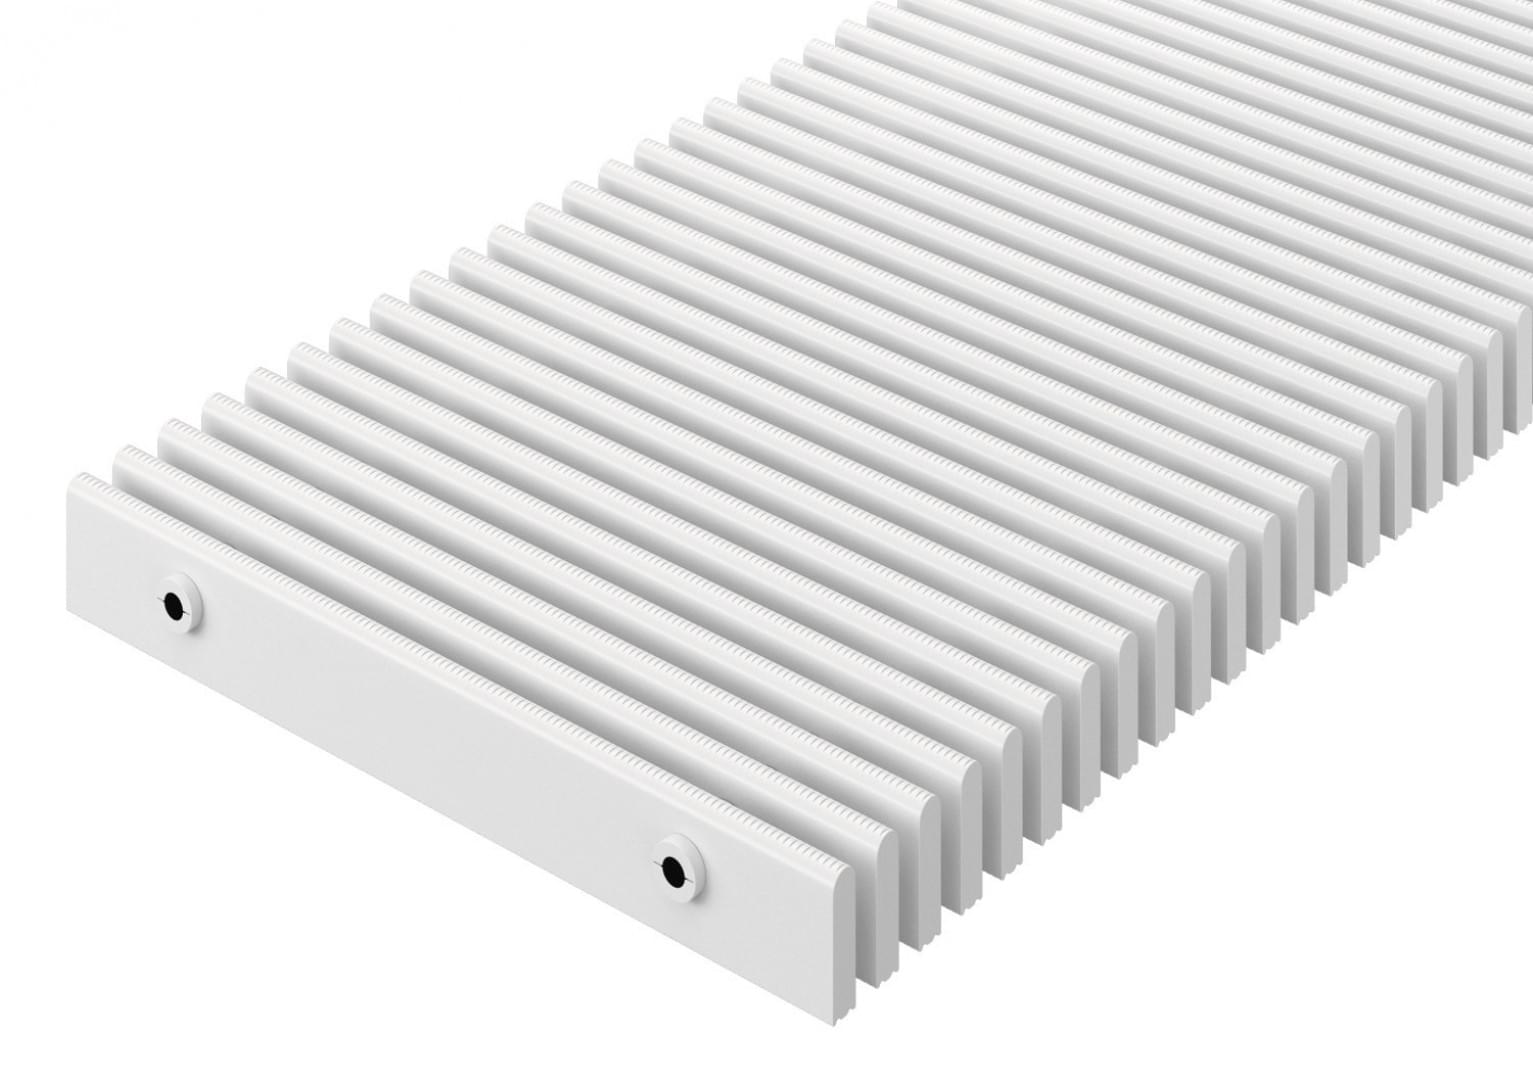 emco swimming pool grates 723/35 from Emco